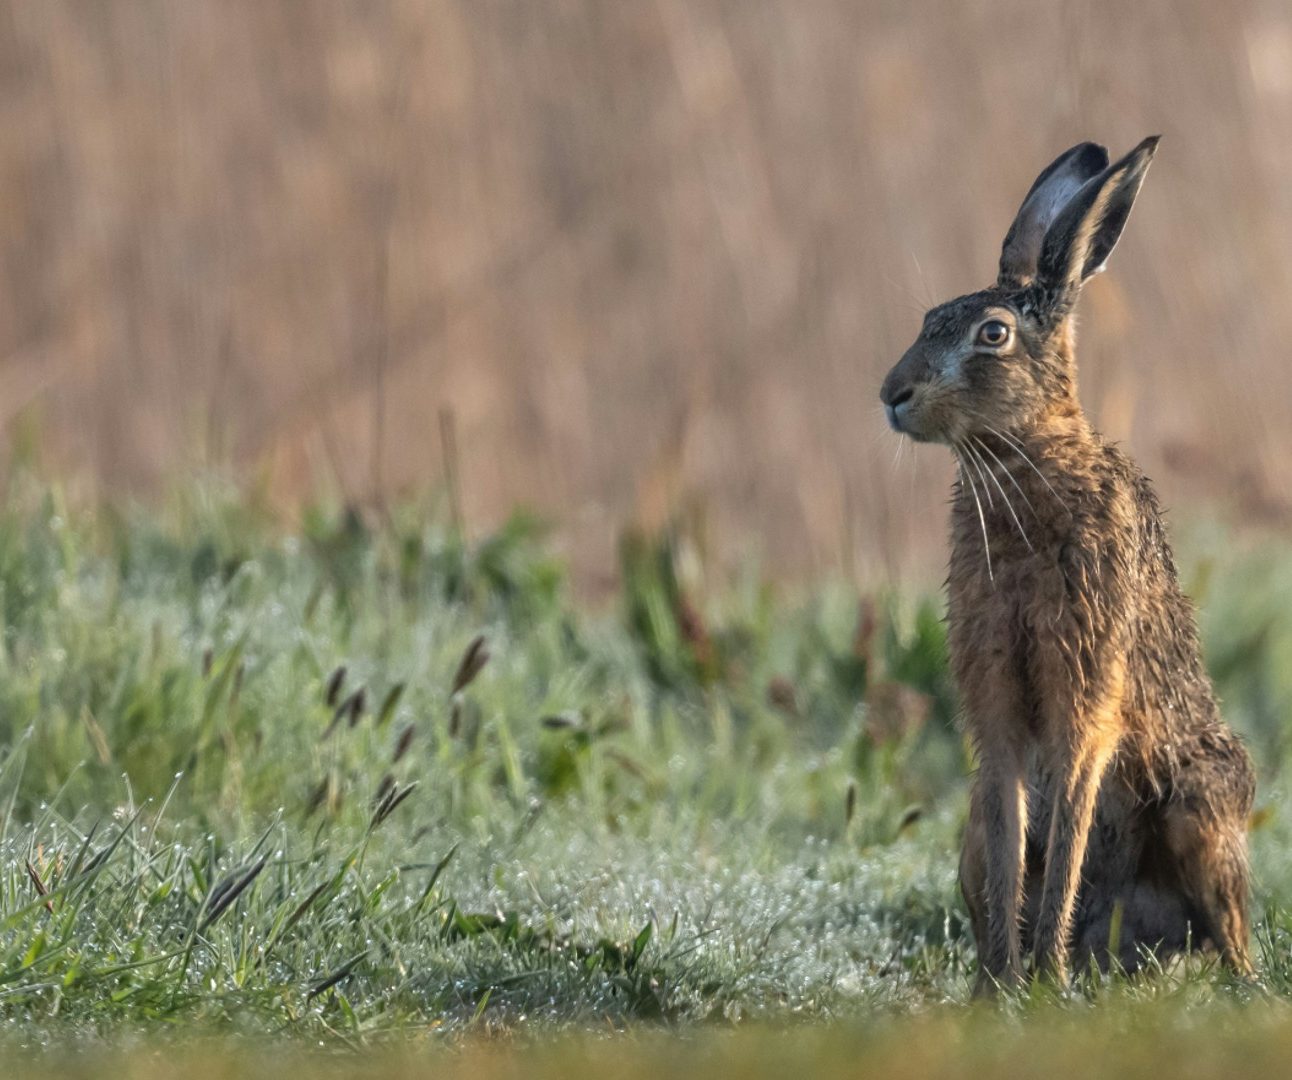 A photo of a hare standing in a field